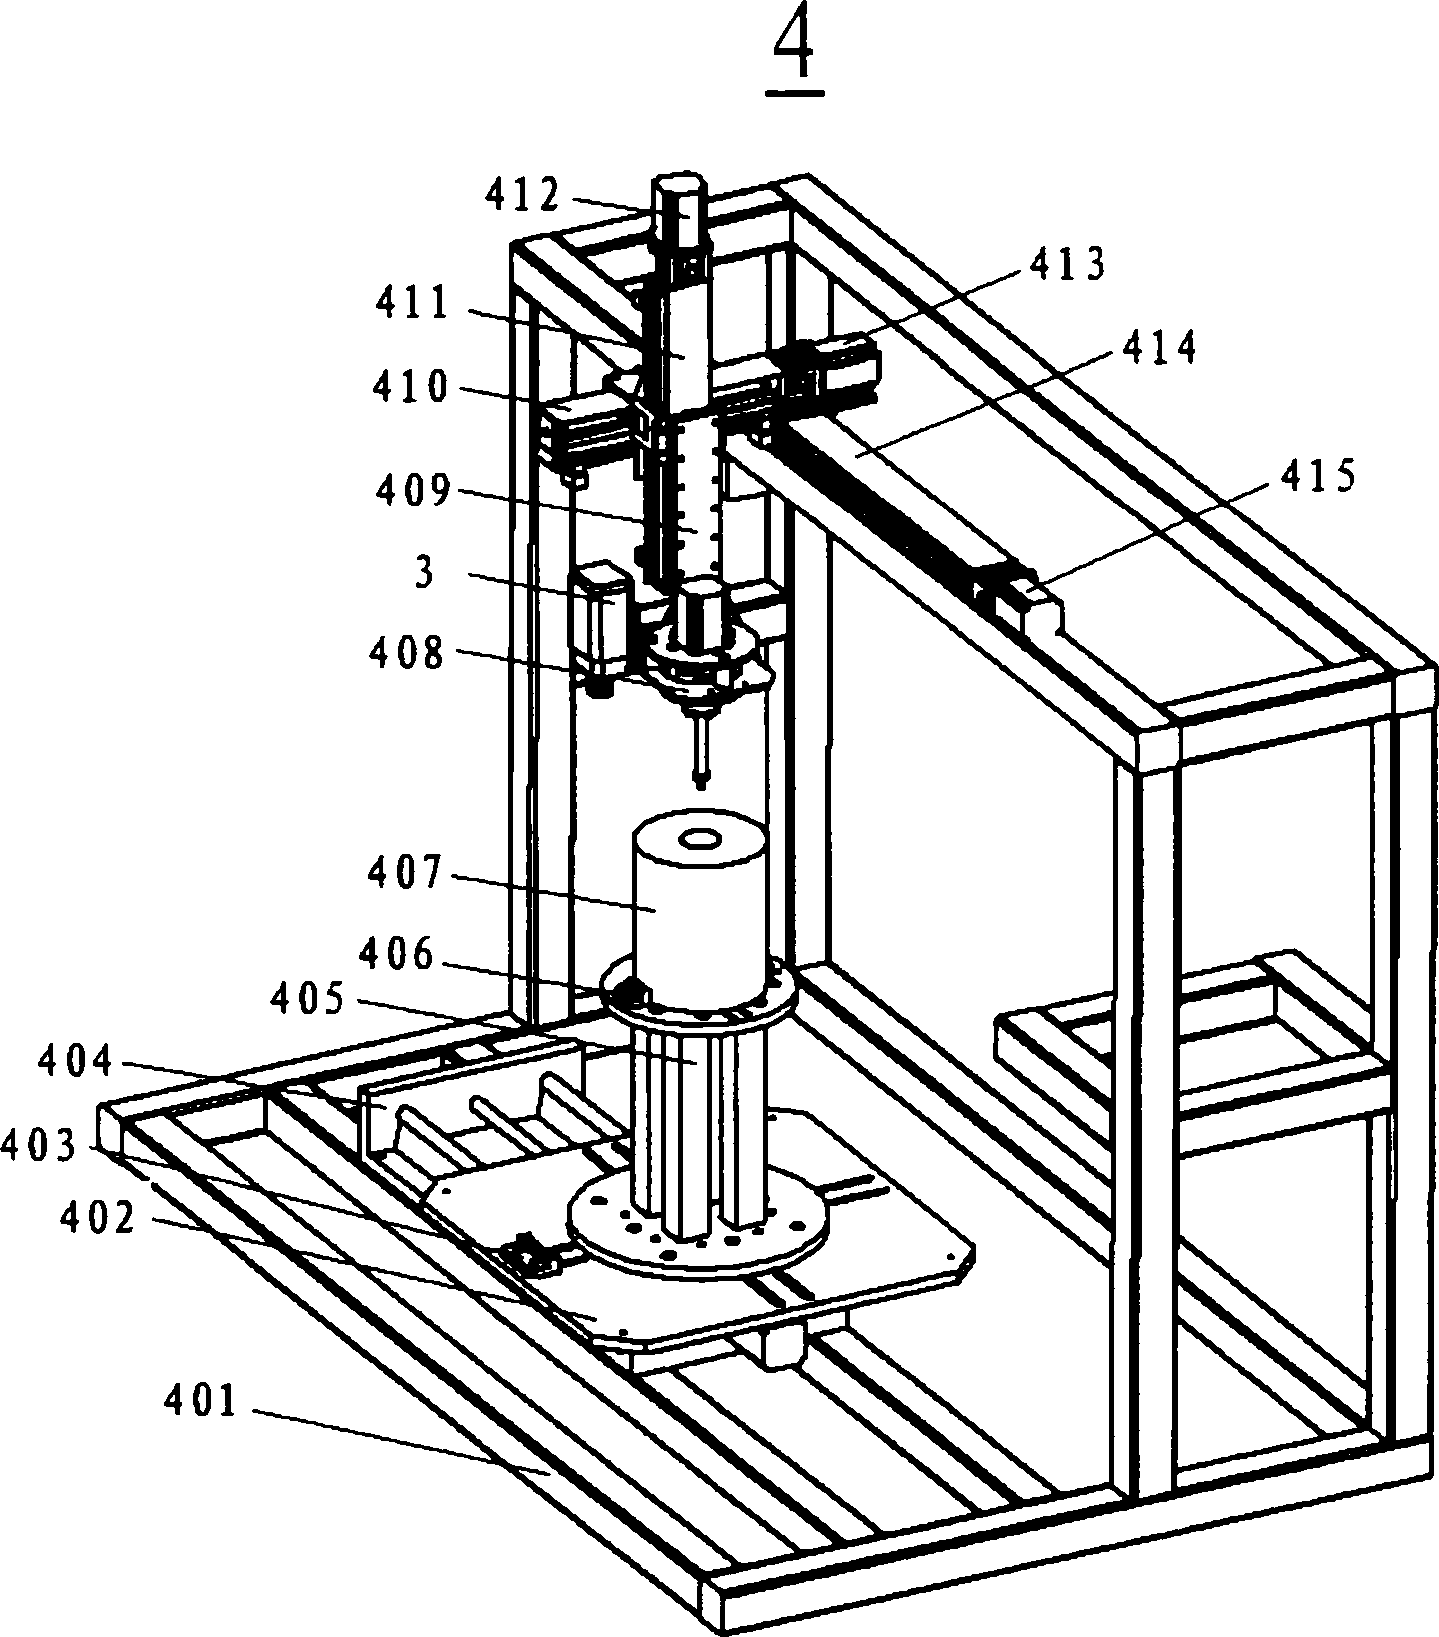 Vision servo system and method for automatic leakage detection platform for sealed radioactive source